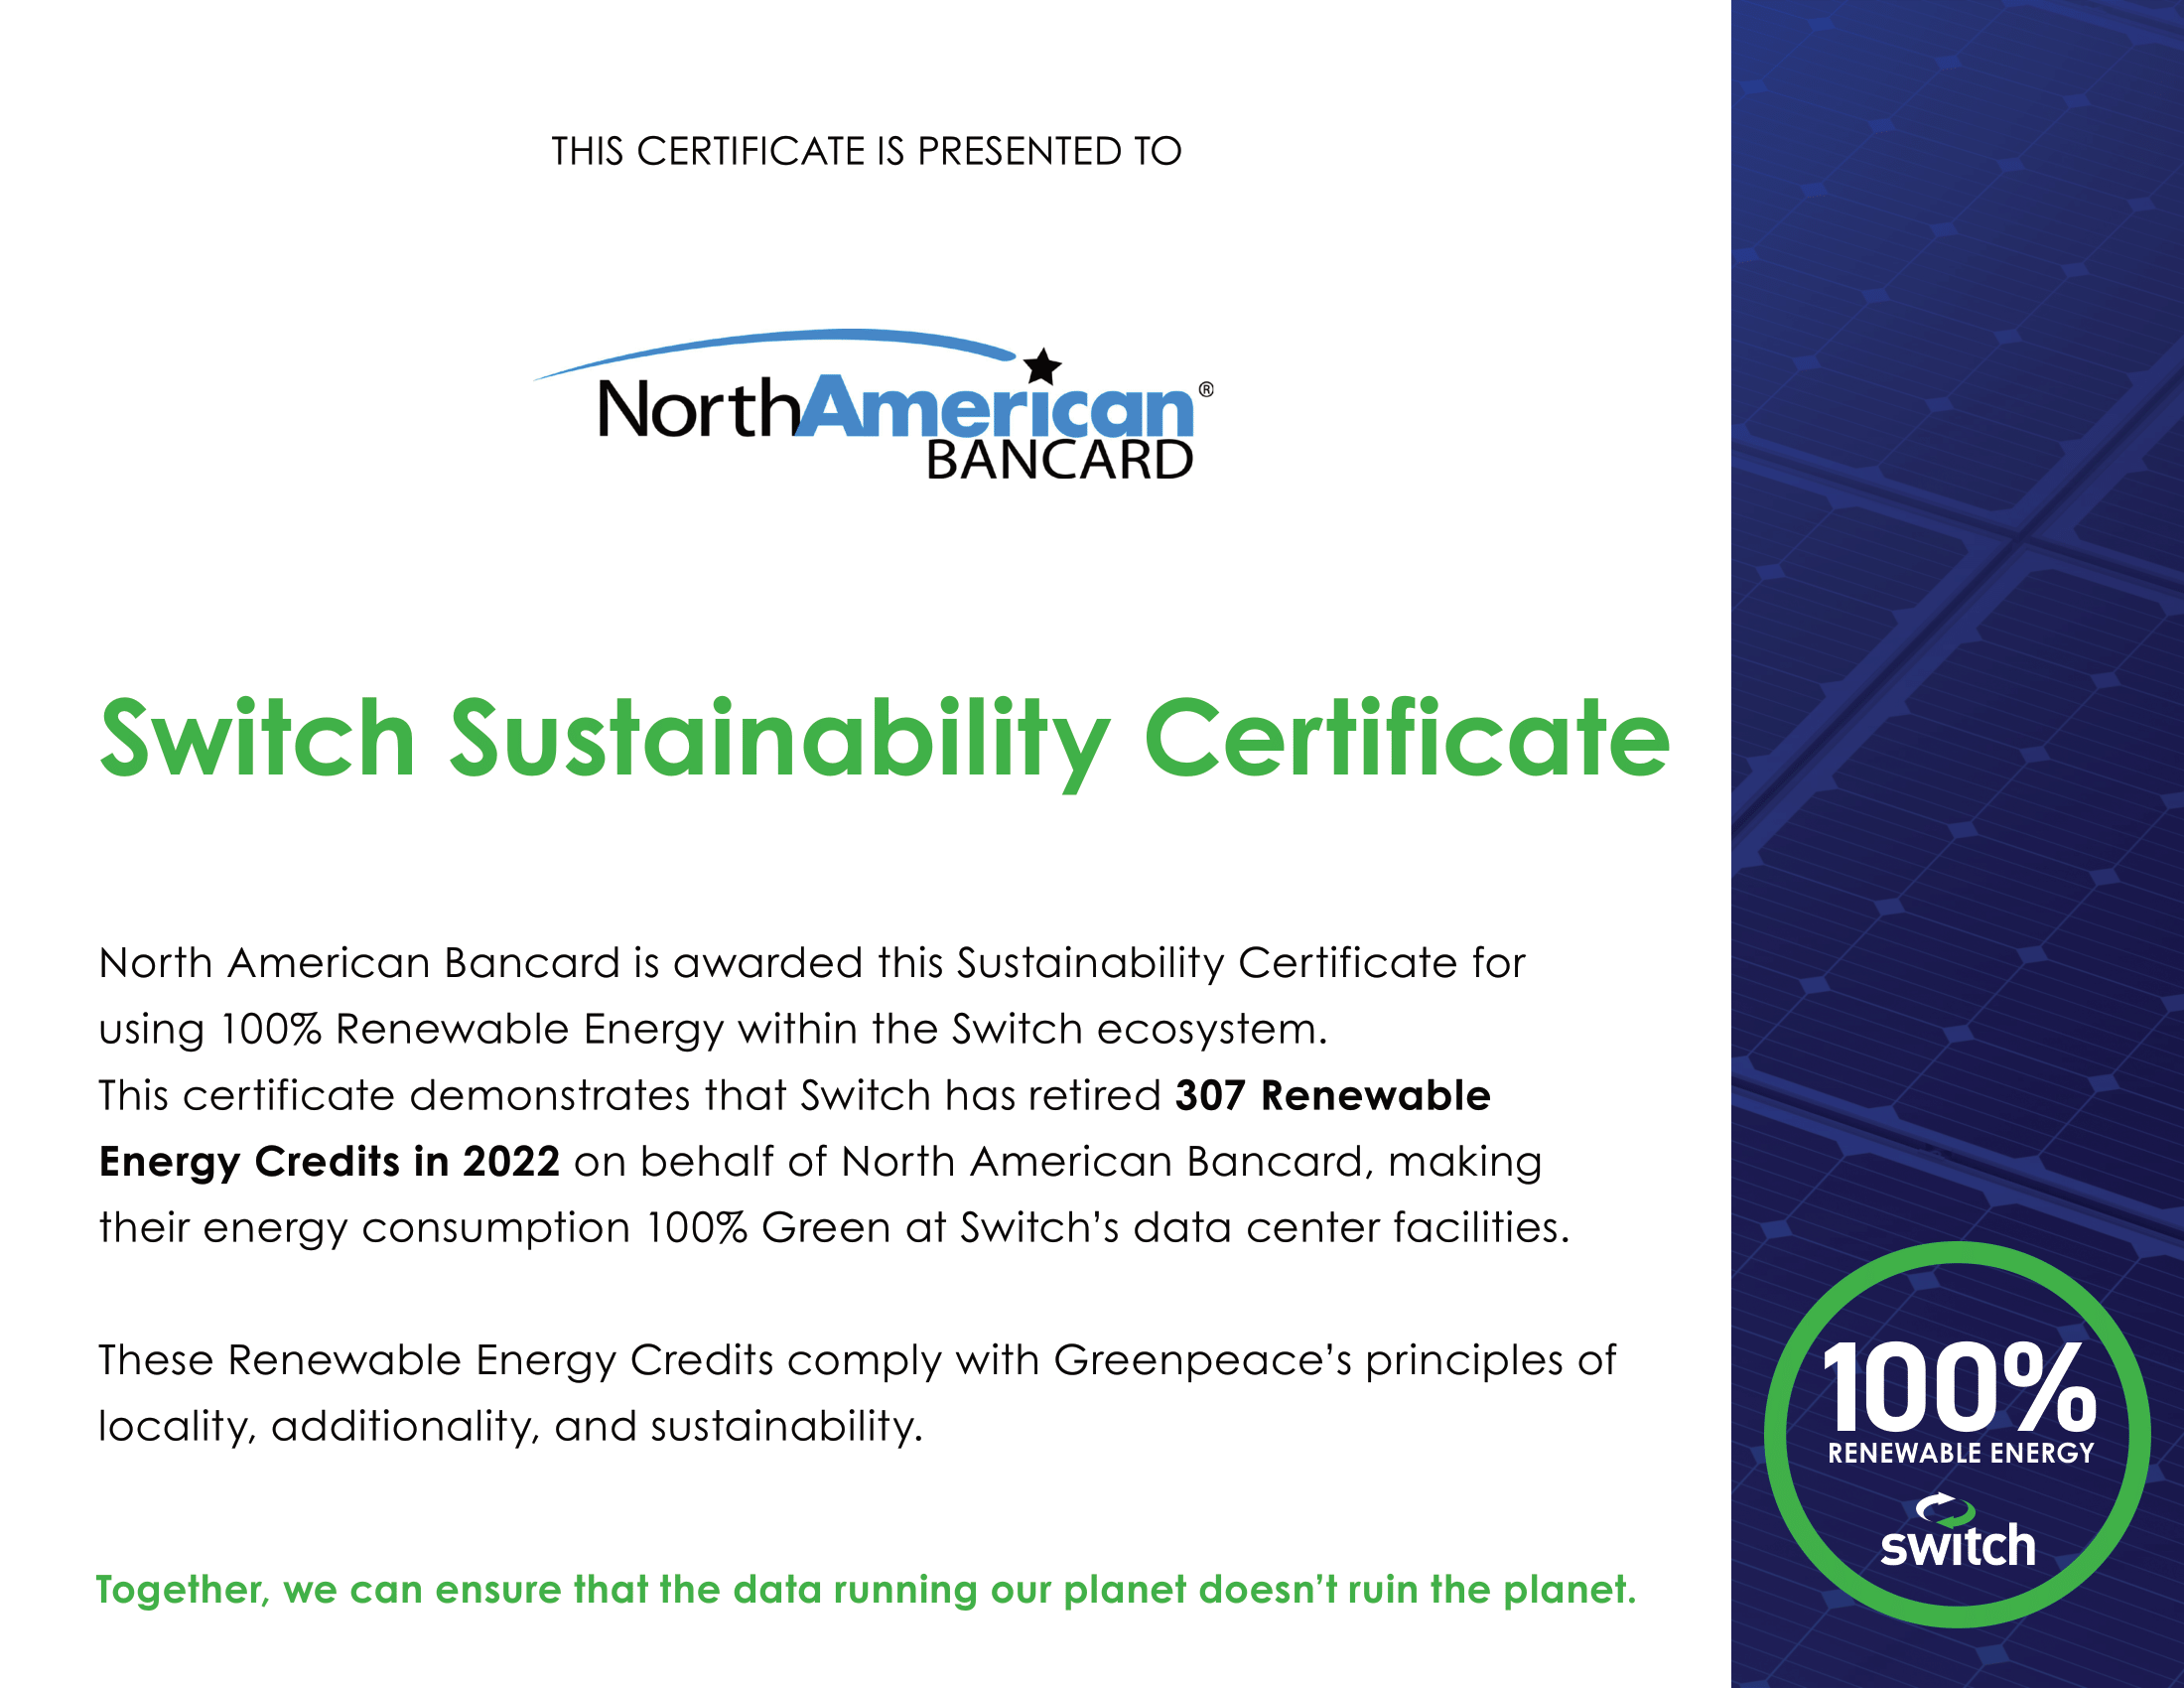 North American Bancard Switch Sustainability Certificate. North American Bancard is awarded this Sustainability Certificate for using 100% Renewable Energy within the Switch ecosystem. This certificate demonstrates that Switch has retired 307 Renewable Energy Credits in 2022 on behalf of North American Bancard, making their energy consumption 100% Green at Switch's data center facilities. These Renewable Energy Credits comply with Greenpeace's principles of locally, additionality, and sustainability.